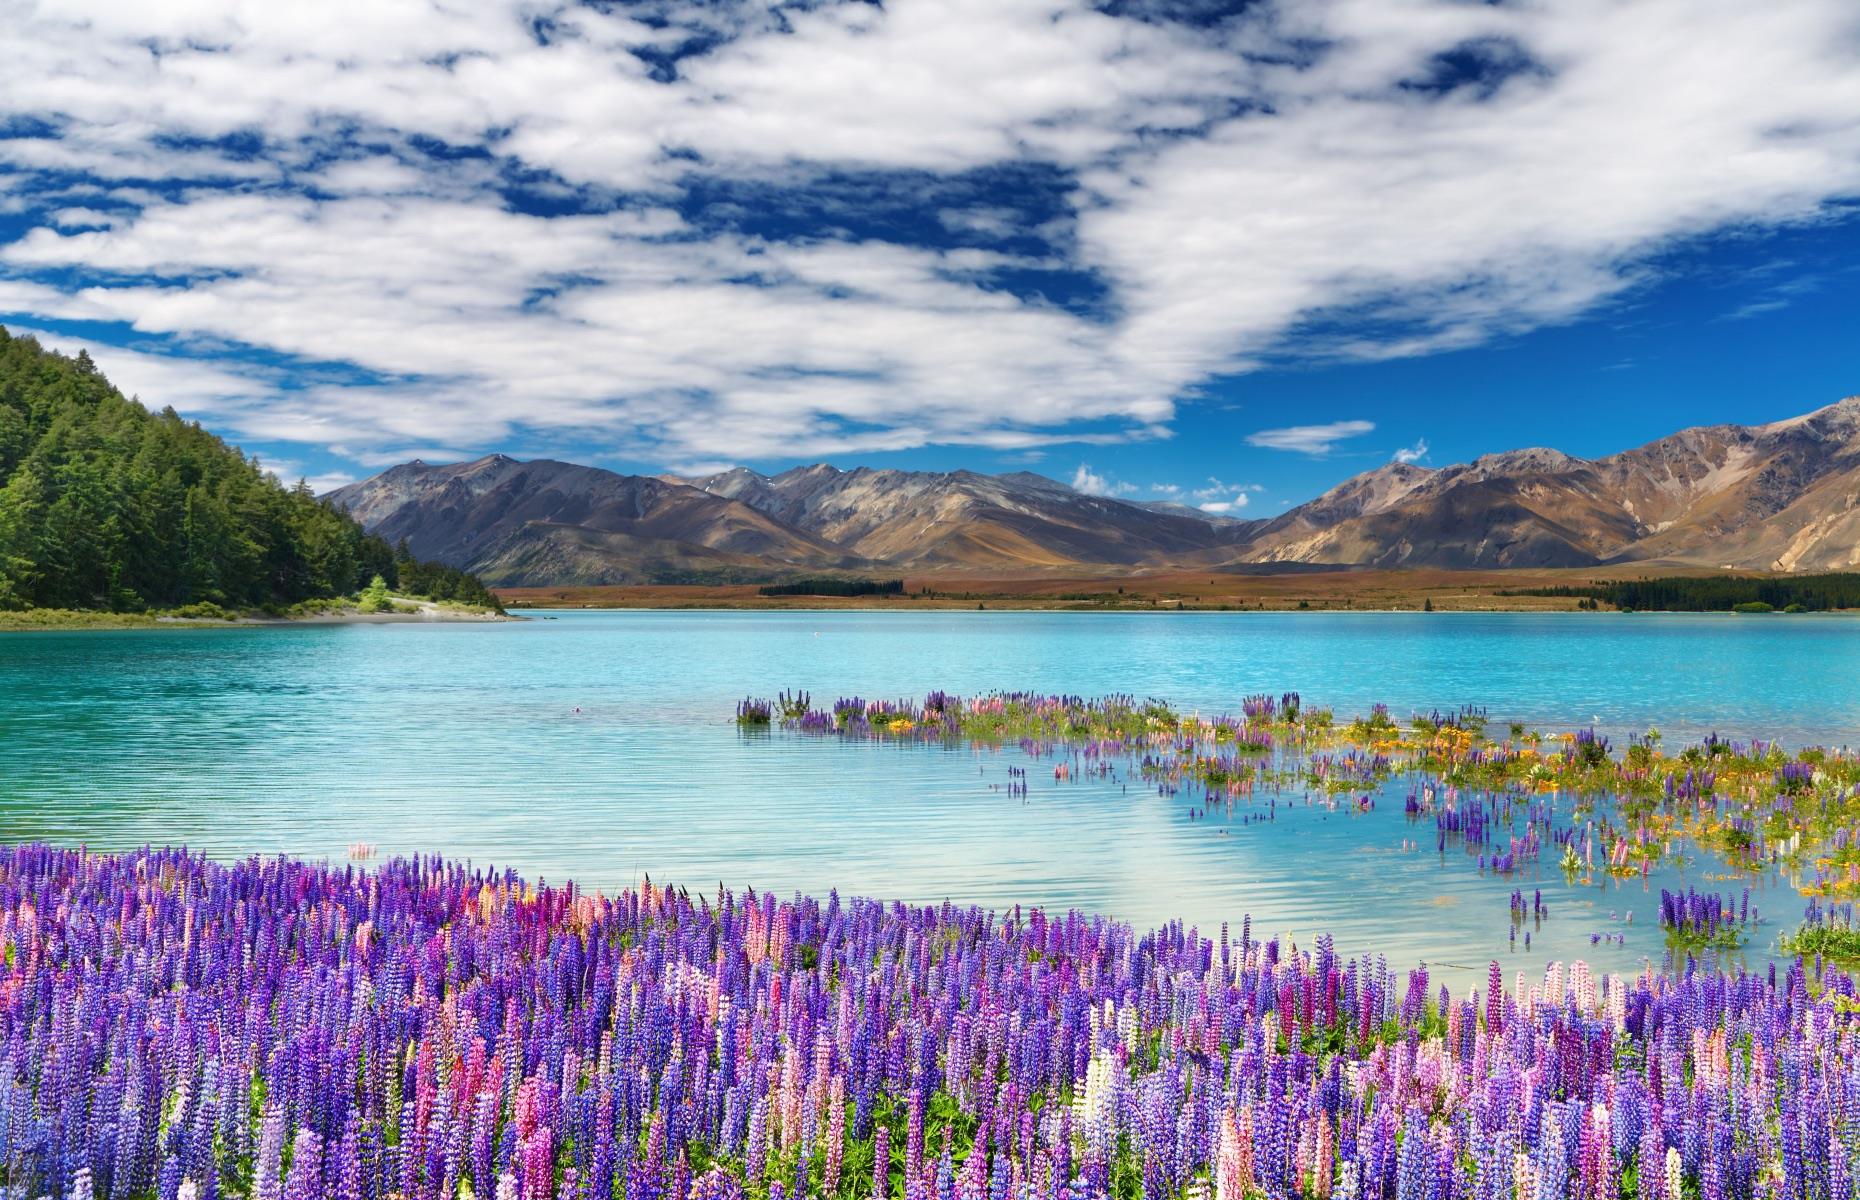 <p>Lake Tekapo is a sight to behold. This turquoise lake in the Southern Alps, fringed by bright pink and purple lupins between November and February each year and surrounded by snow-capped peaks, is truly picturesque. The lake gets its intense color from glacier-grounded minerals suspended in the water. Part of a Unesco Dark Sky Reserve, turn your eyes skywards as night falls for some of the best views of space from Earth.</p>